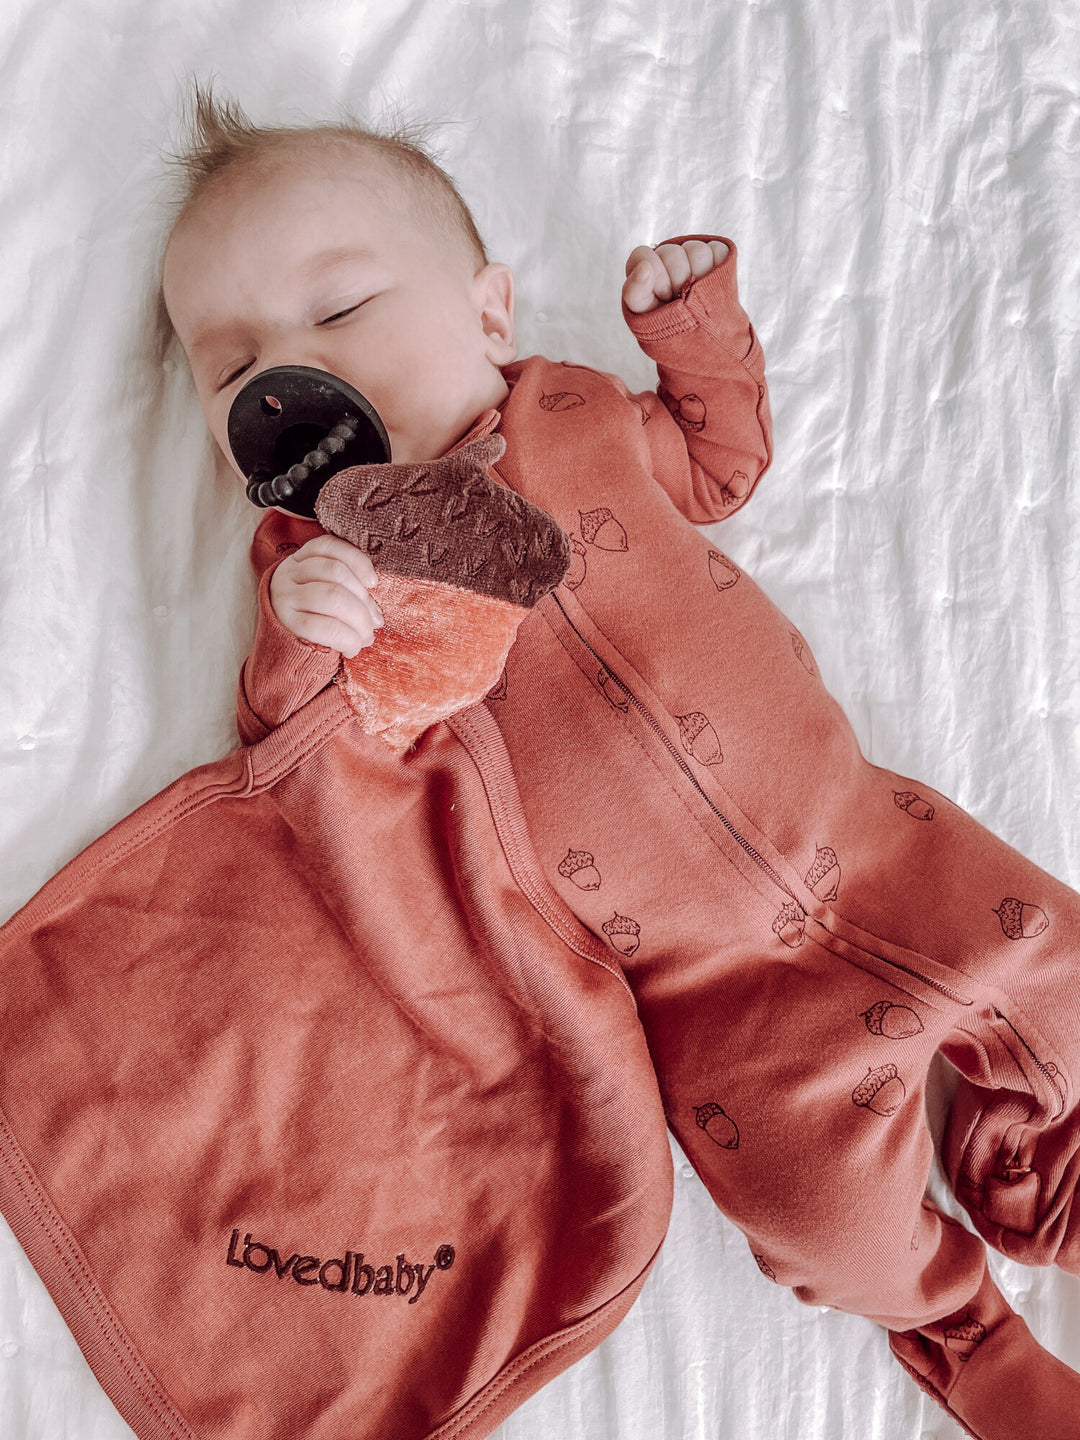 Child wearing Organic Cotton Lovey in Spice.